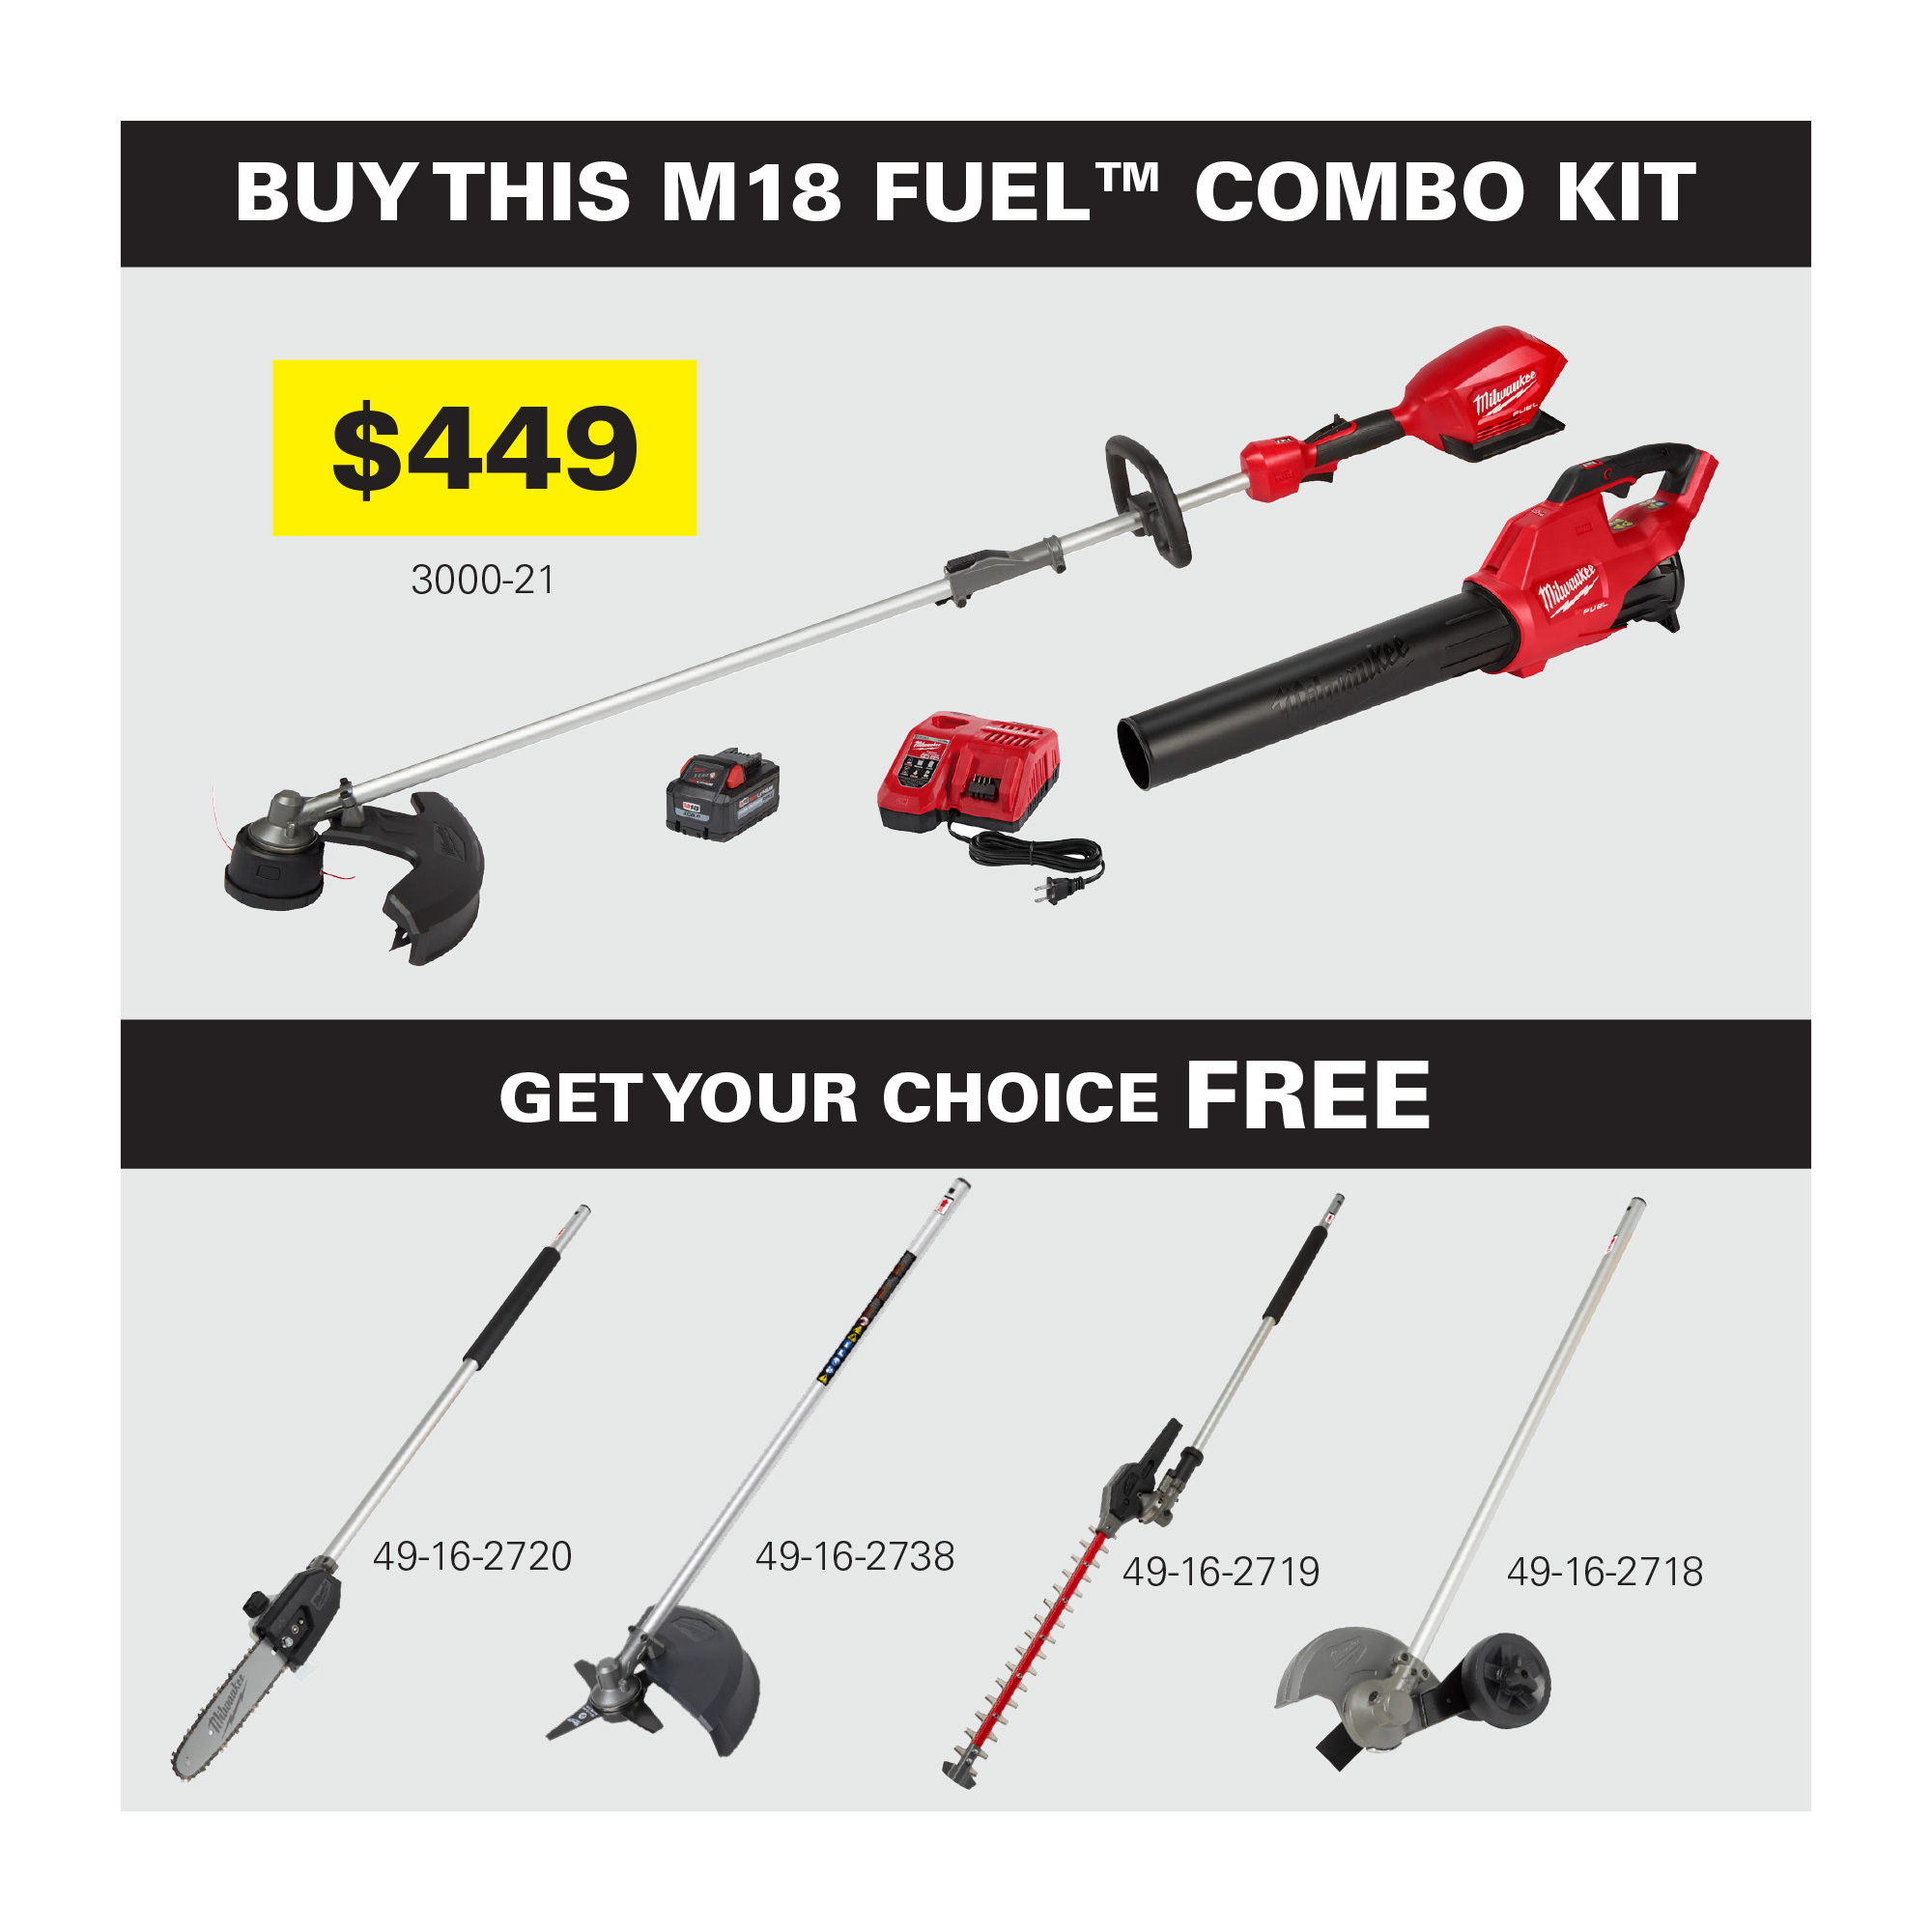 Buy M18 Fuel Combo Kit get FREE Attachment